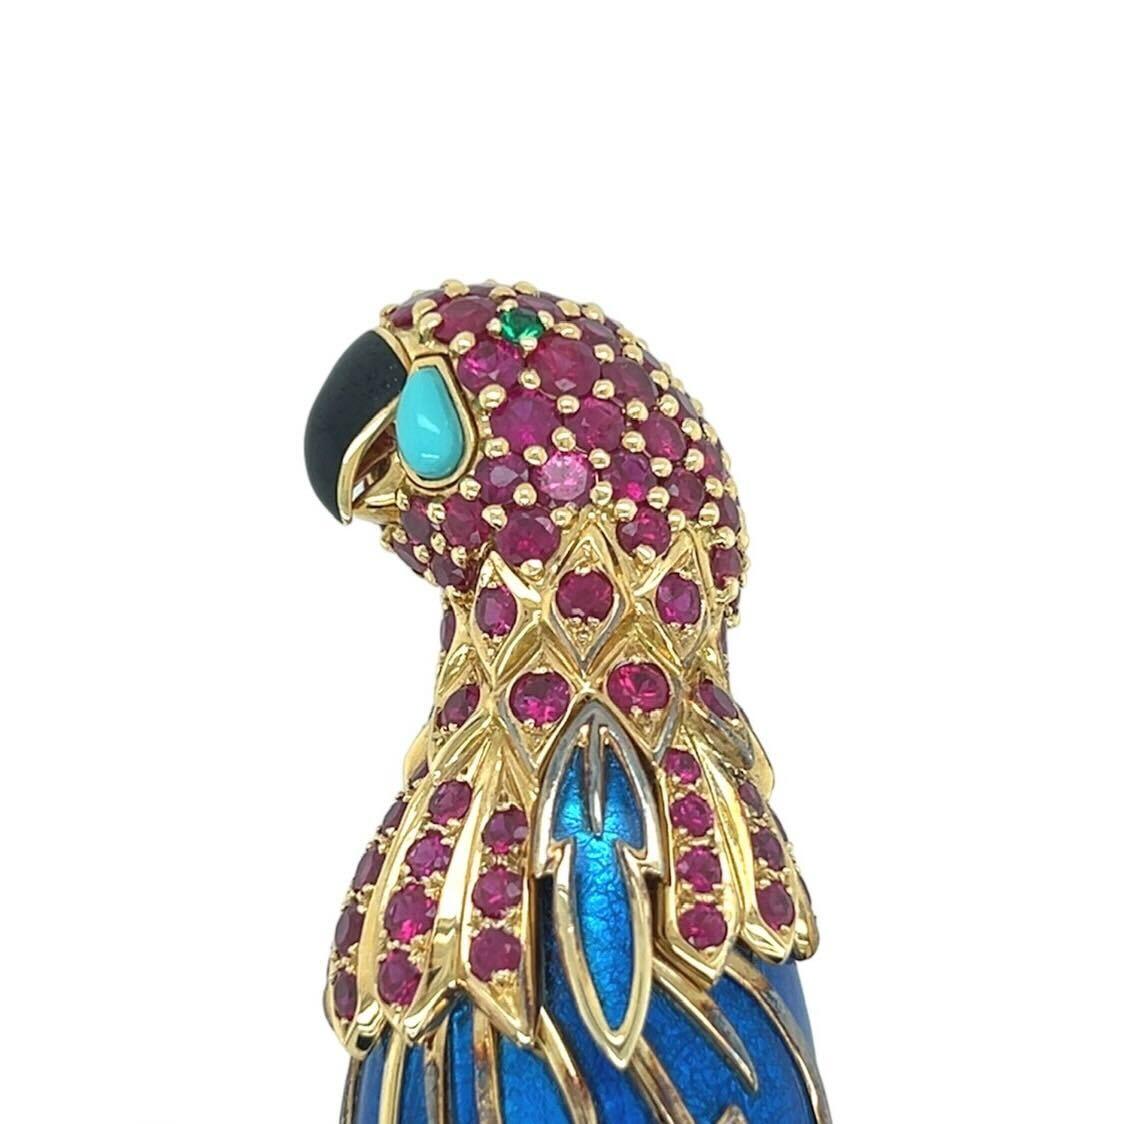 Women's or Men's JEAN SCHLUMBERGER, TIFFANY & CO., Yellow Gold, Ruby, Turquoise and Enamel Brooch For Sale